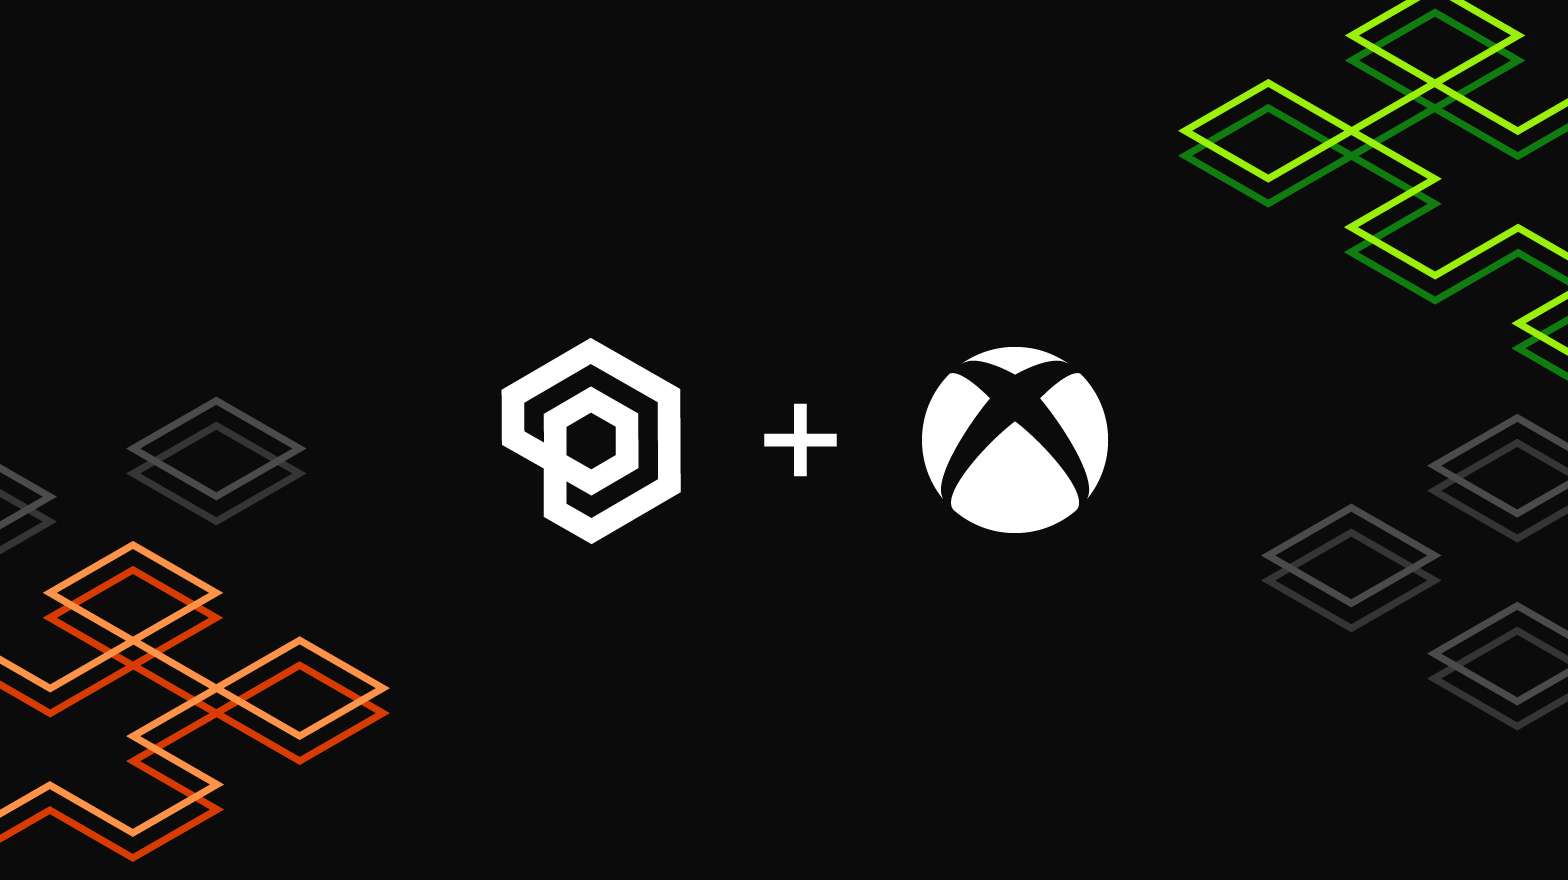 Azure PlayFab and Xbox better together on a grey background with orange and green lines in the bottom left and top right corners